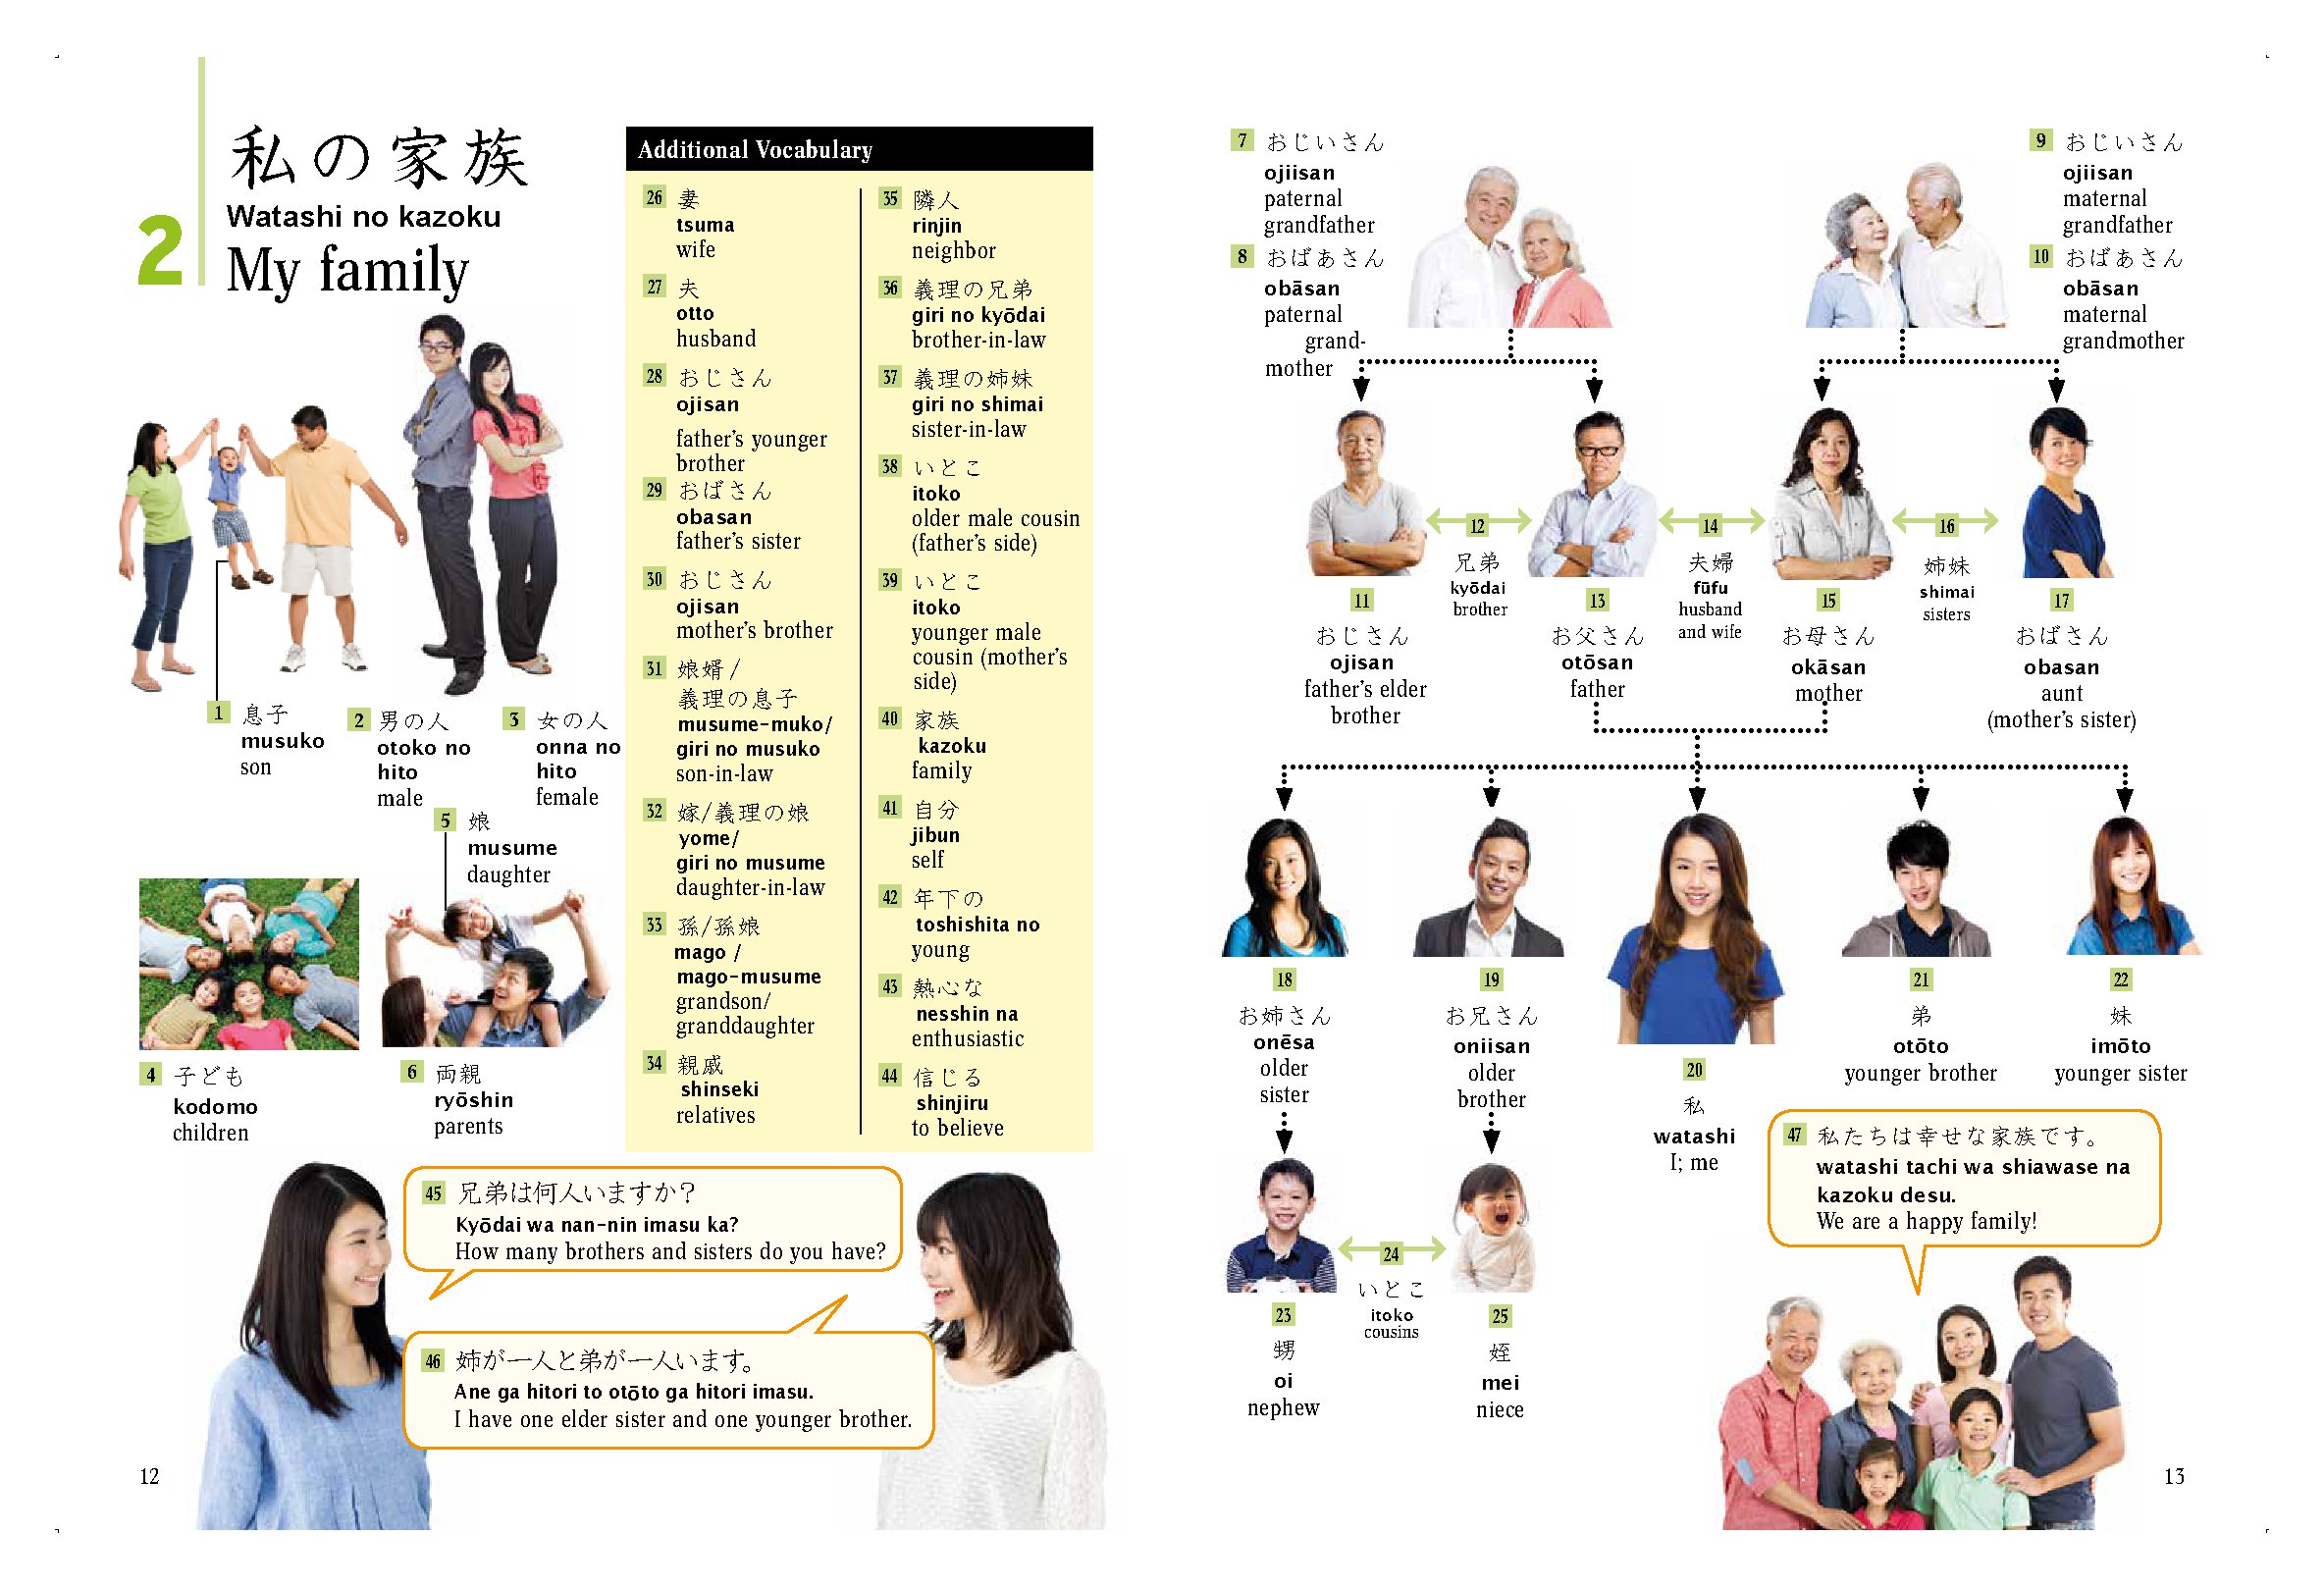 Japanese Picture Dictionary